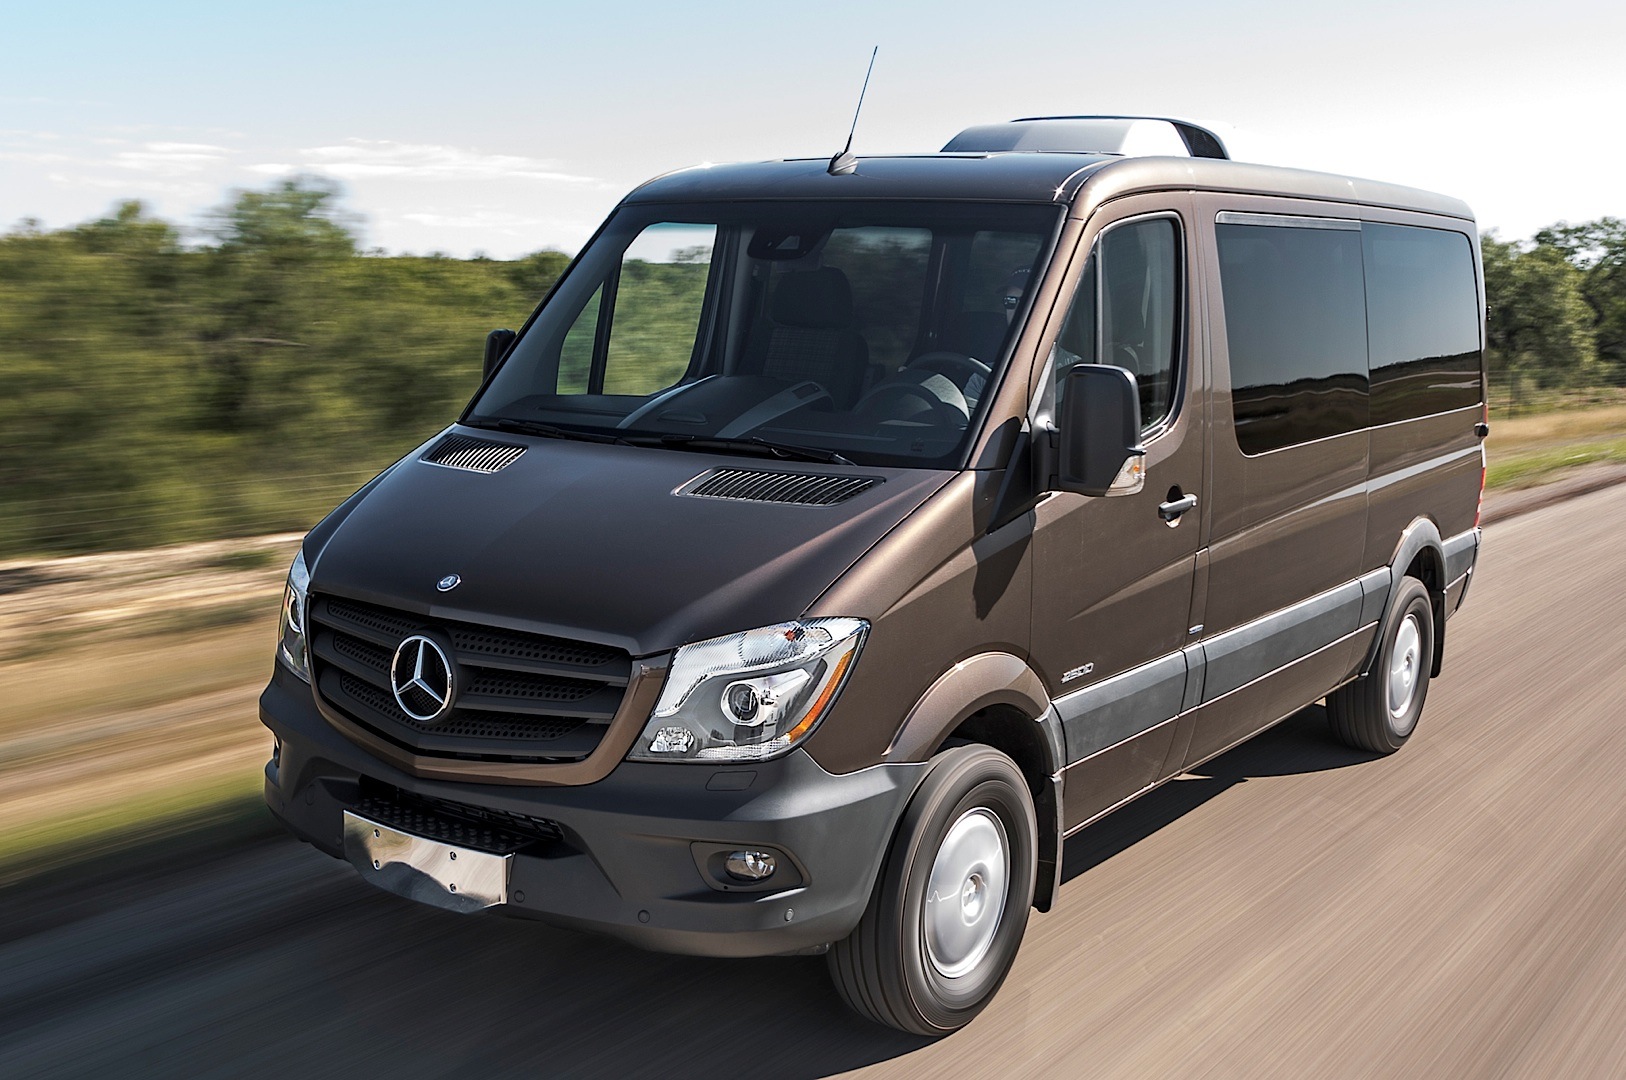 2014 Mercedes-Benz Sprinter Gets Reviewed by Truck Trend - autoevolution What Van Gets The Best Gas Mileage